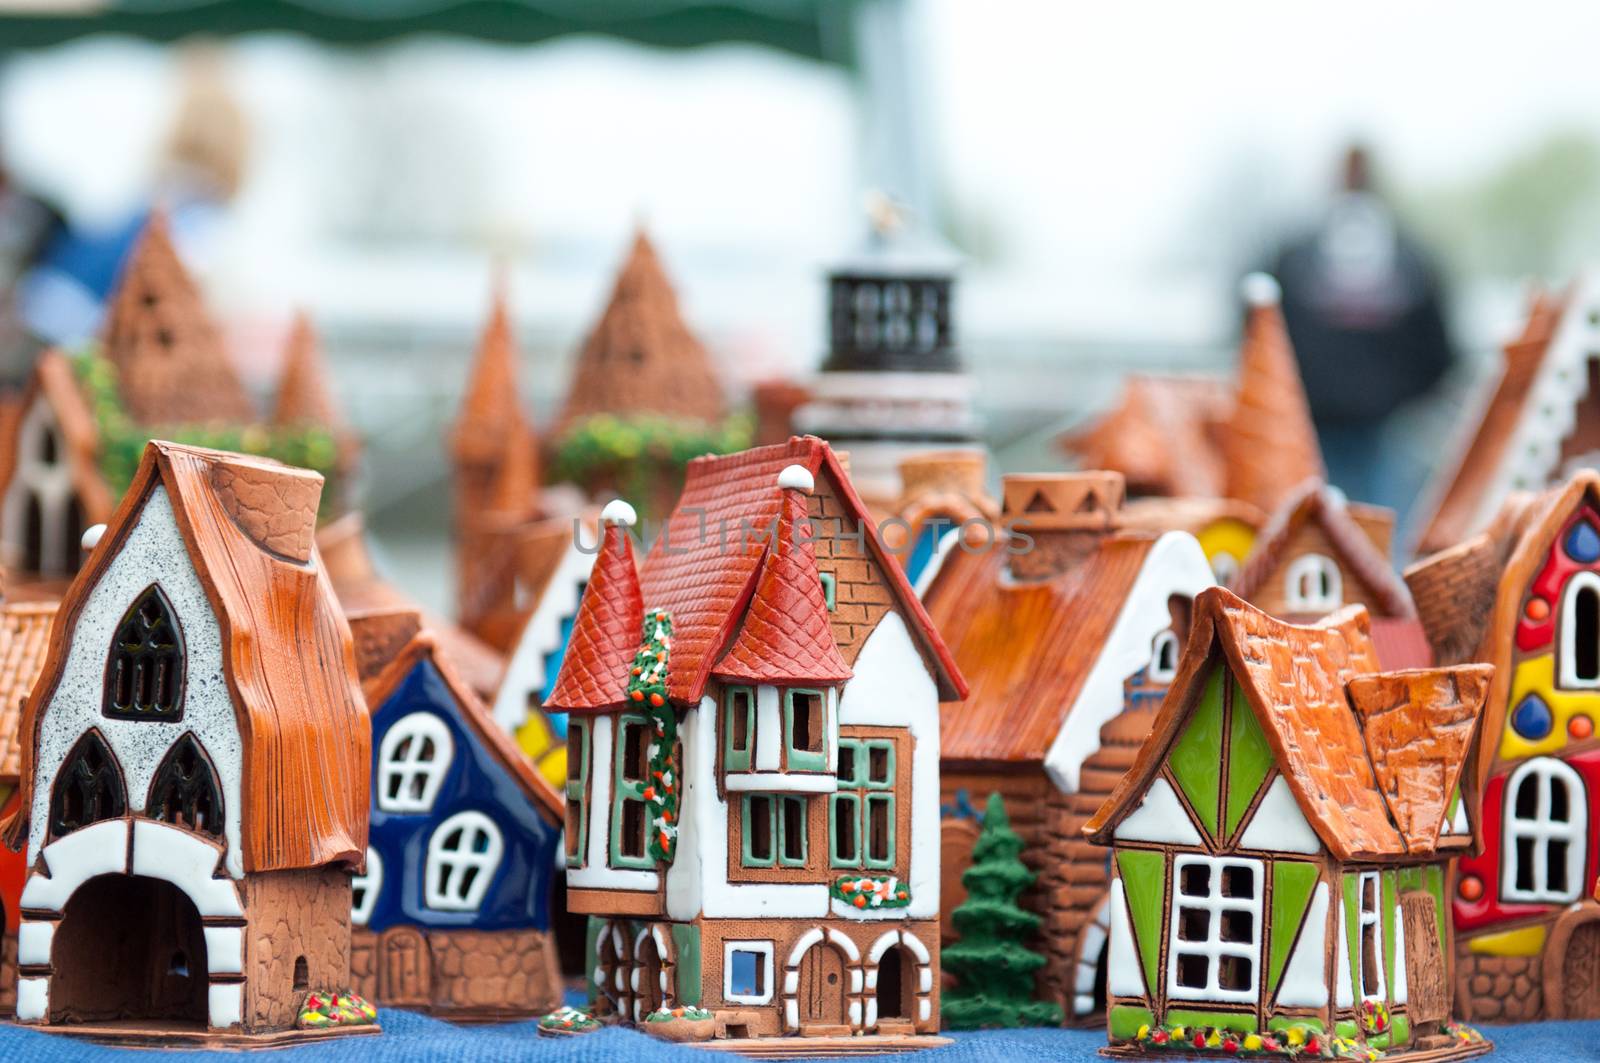 Many ceramic toys for children. Souvenirs. Building houses and lighthouses.